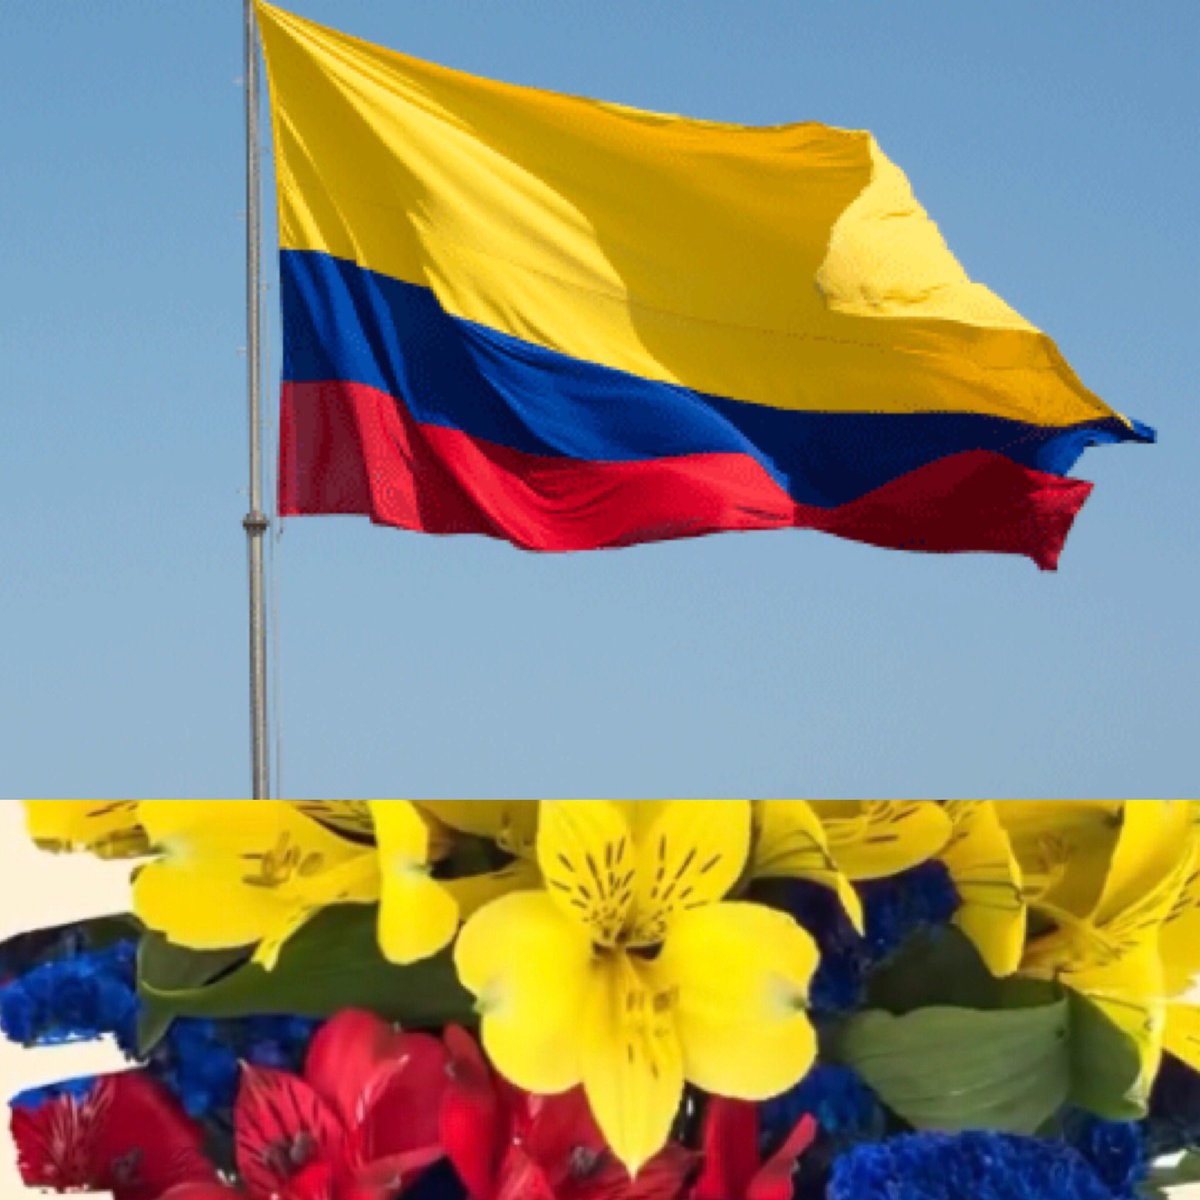 Thank you Colombia for lending us your people, your land, your resources, your sky and we are proud to carry your last name FLOWERS FROM COLOMBIA 🇨🇴🇨🇴🇨🇴. Happy July 20 🇨🇴🇨🇴🇨🇴.
#happy20thJulio #FloresElMoralFarm, #FlowersOfColombia, #DiversityThatInspires, #RosesFloresElMoralFarm,